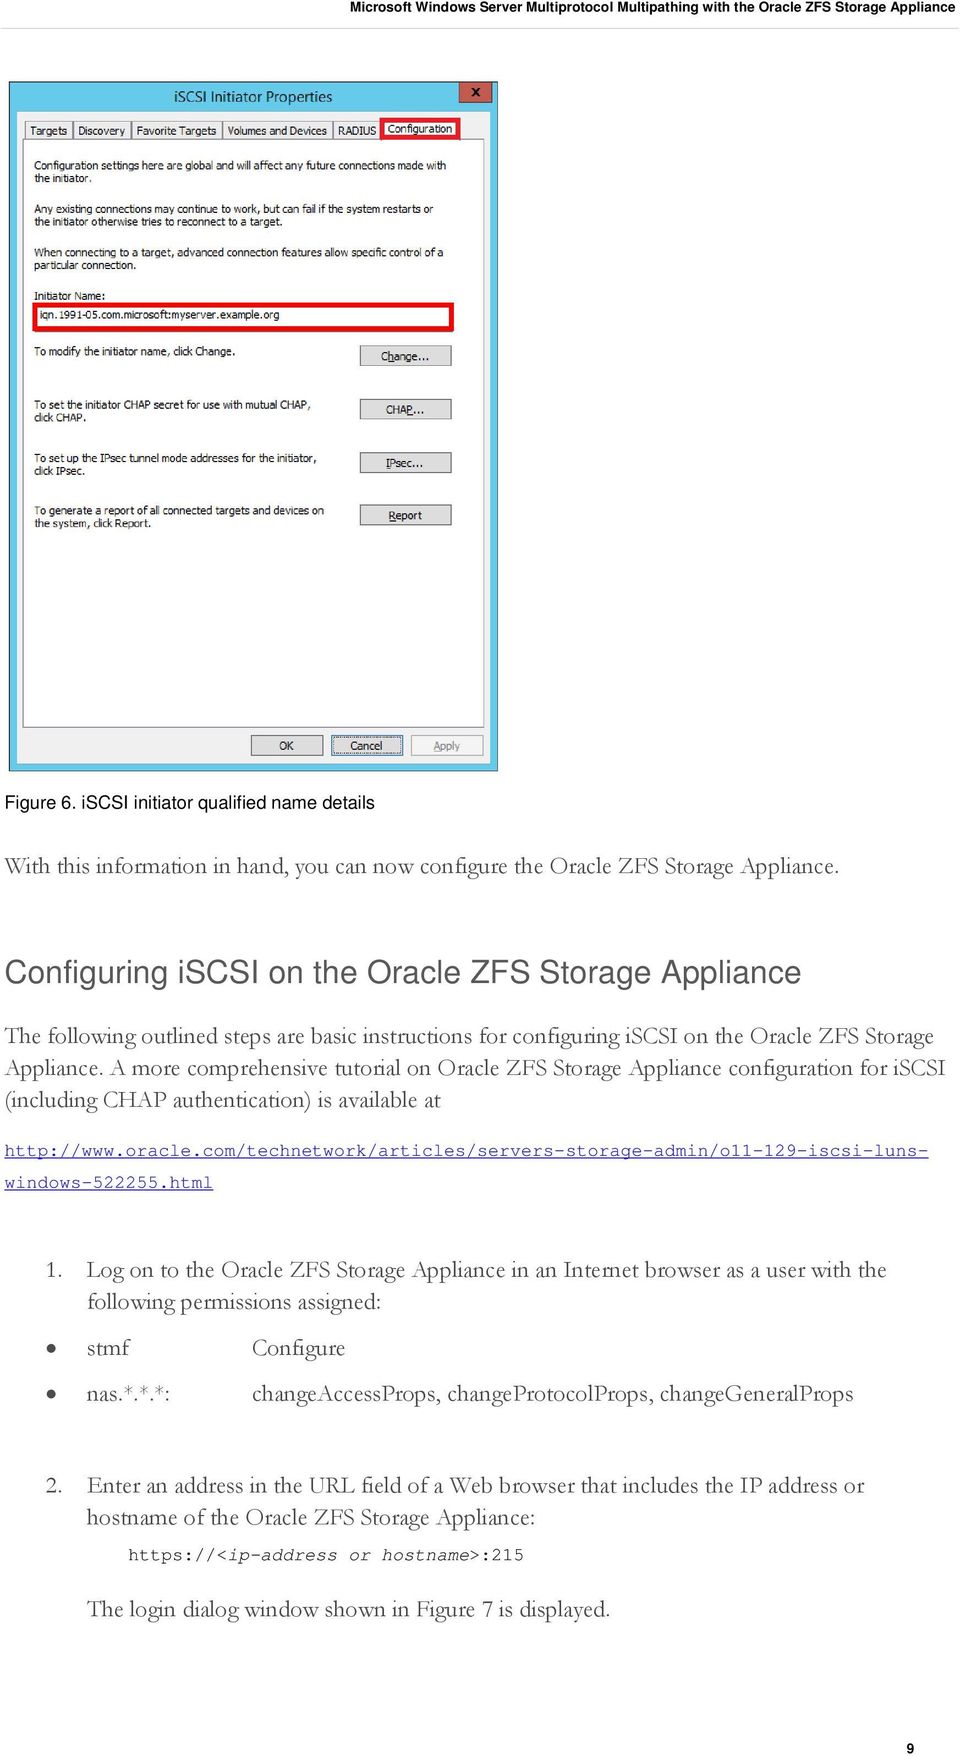 A more comprehensive tutorial on Oracle ZFS Storage Appliance configuration for iscsi (including CHAP authentication) is available at http://www.oracle.